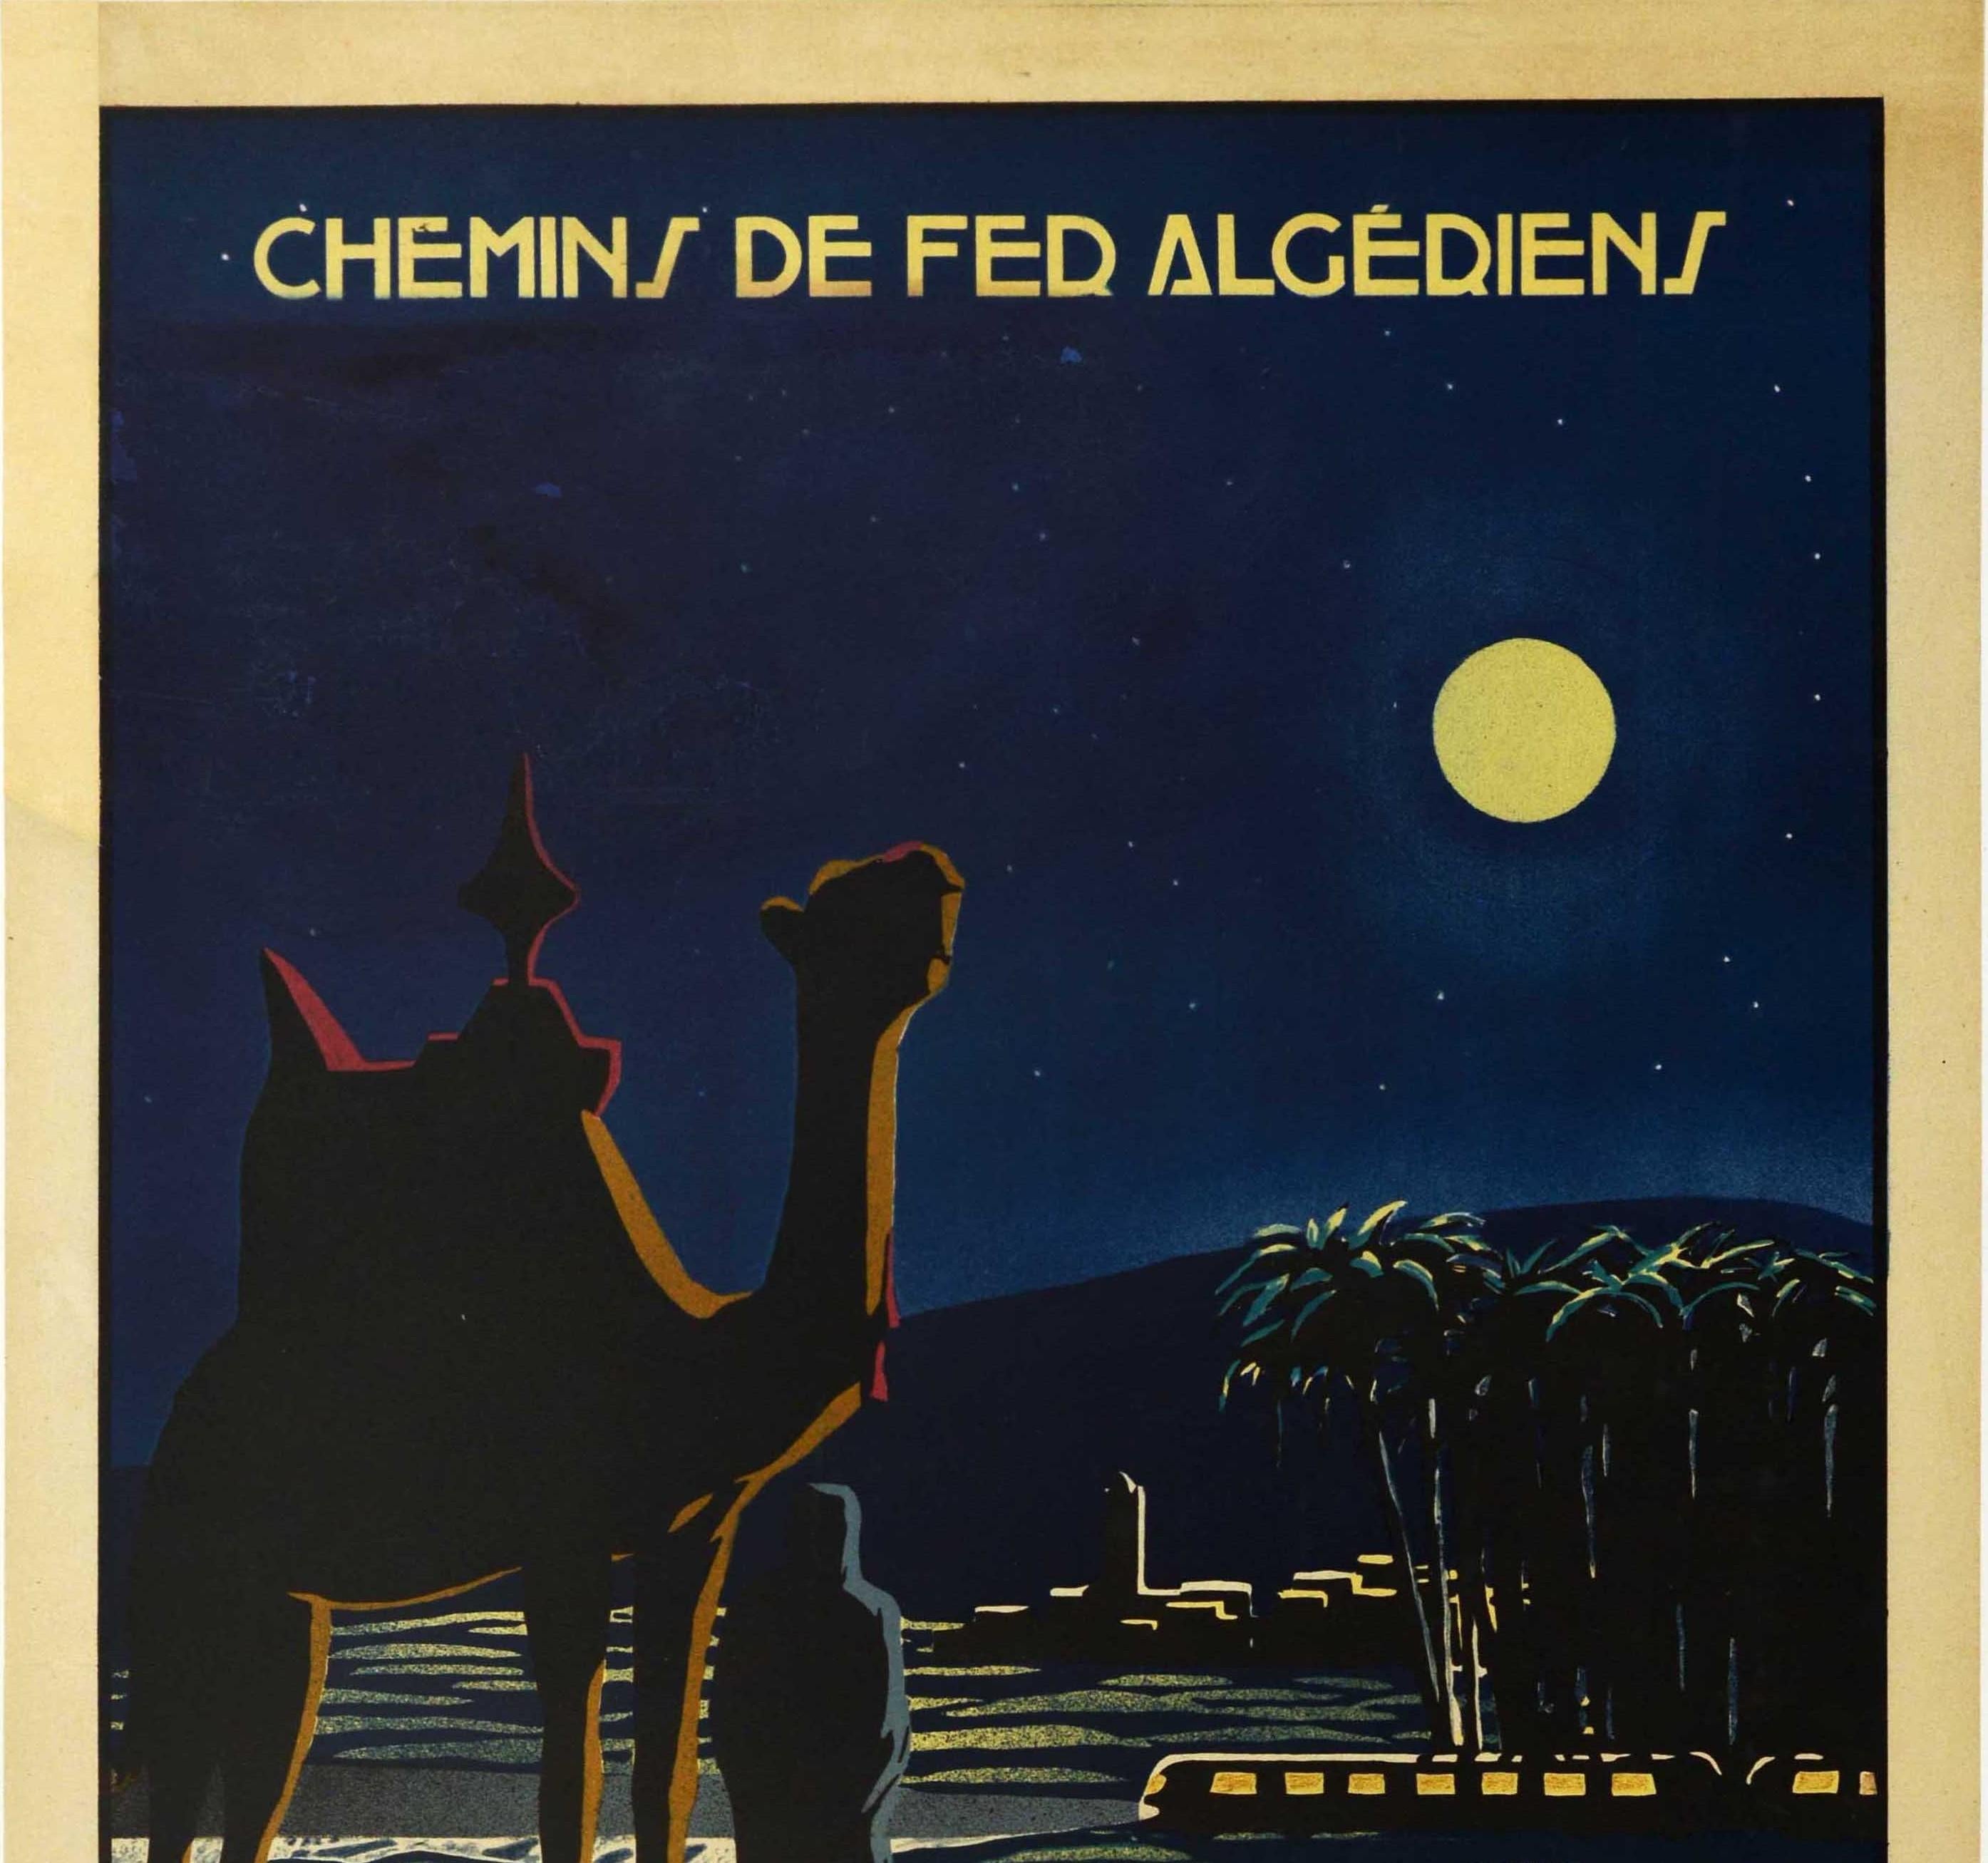 Original vintage Algerian railway travel poster - Chemins de Fer Algeriens Le Sud Algerien Nuit Saharienne / South Algerian Sahara Night - featuring a stunning romantic illustration of a Berber in traditional clothing and a camel standing on moonlit